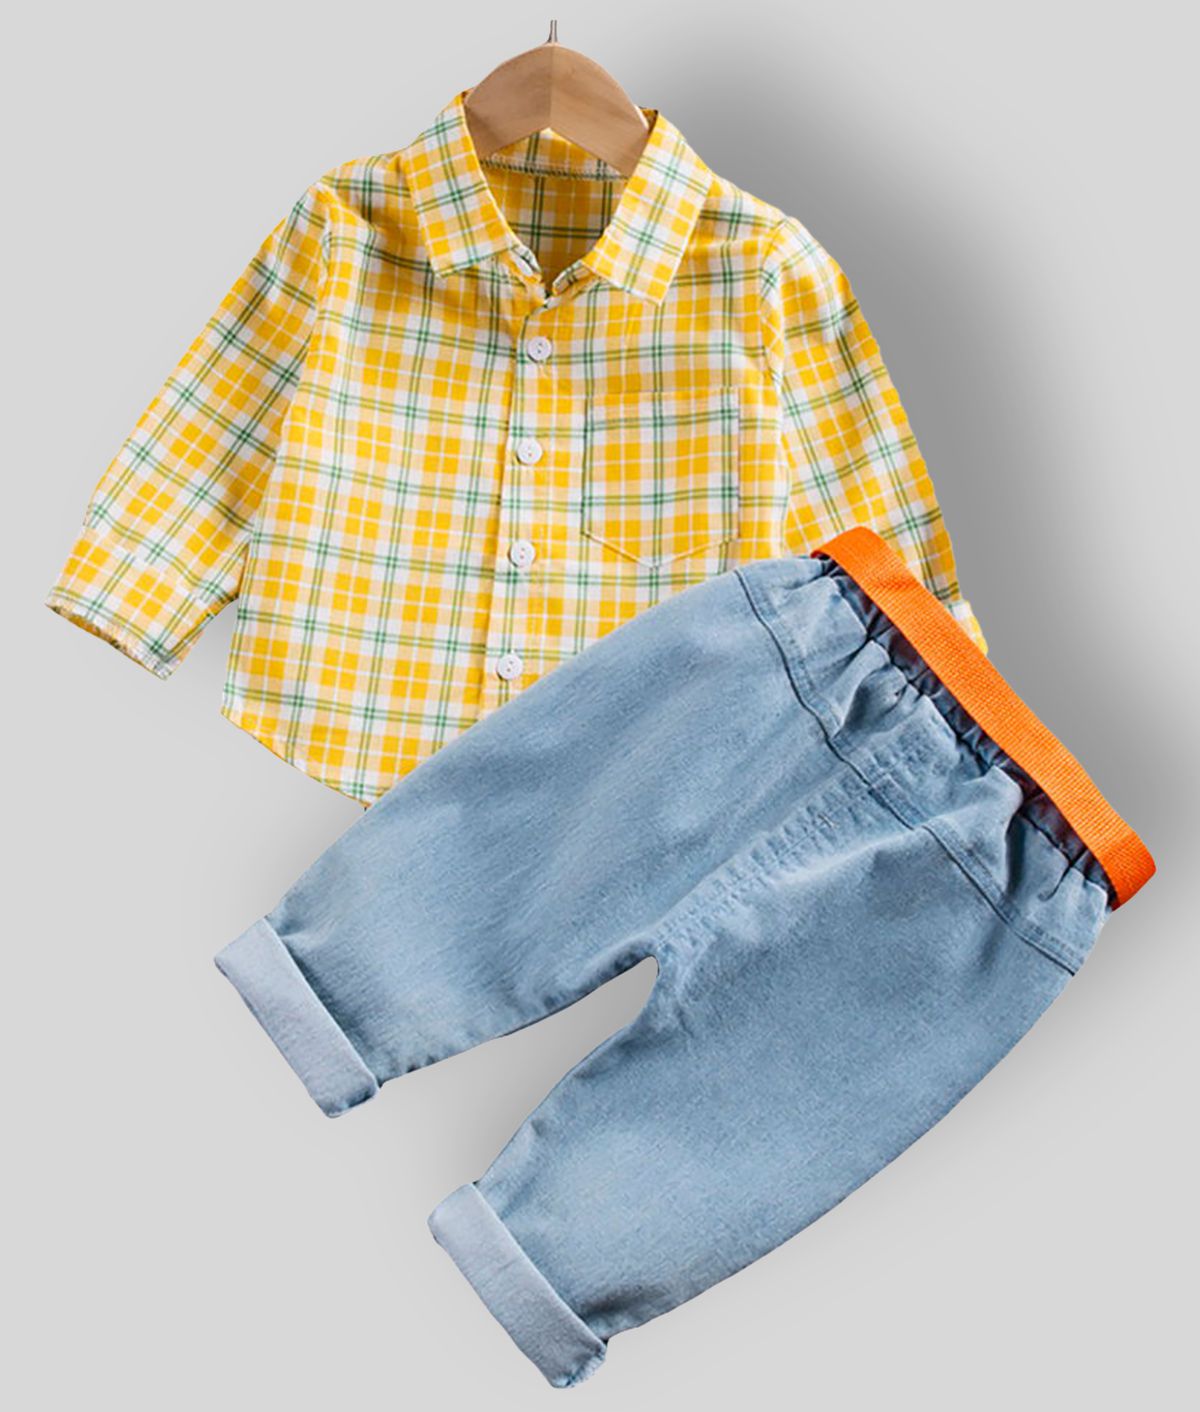 HOPSCOTCH - Yellow Polyester Boy's Shirt & Jeans ( Pack of 1 )